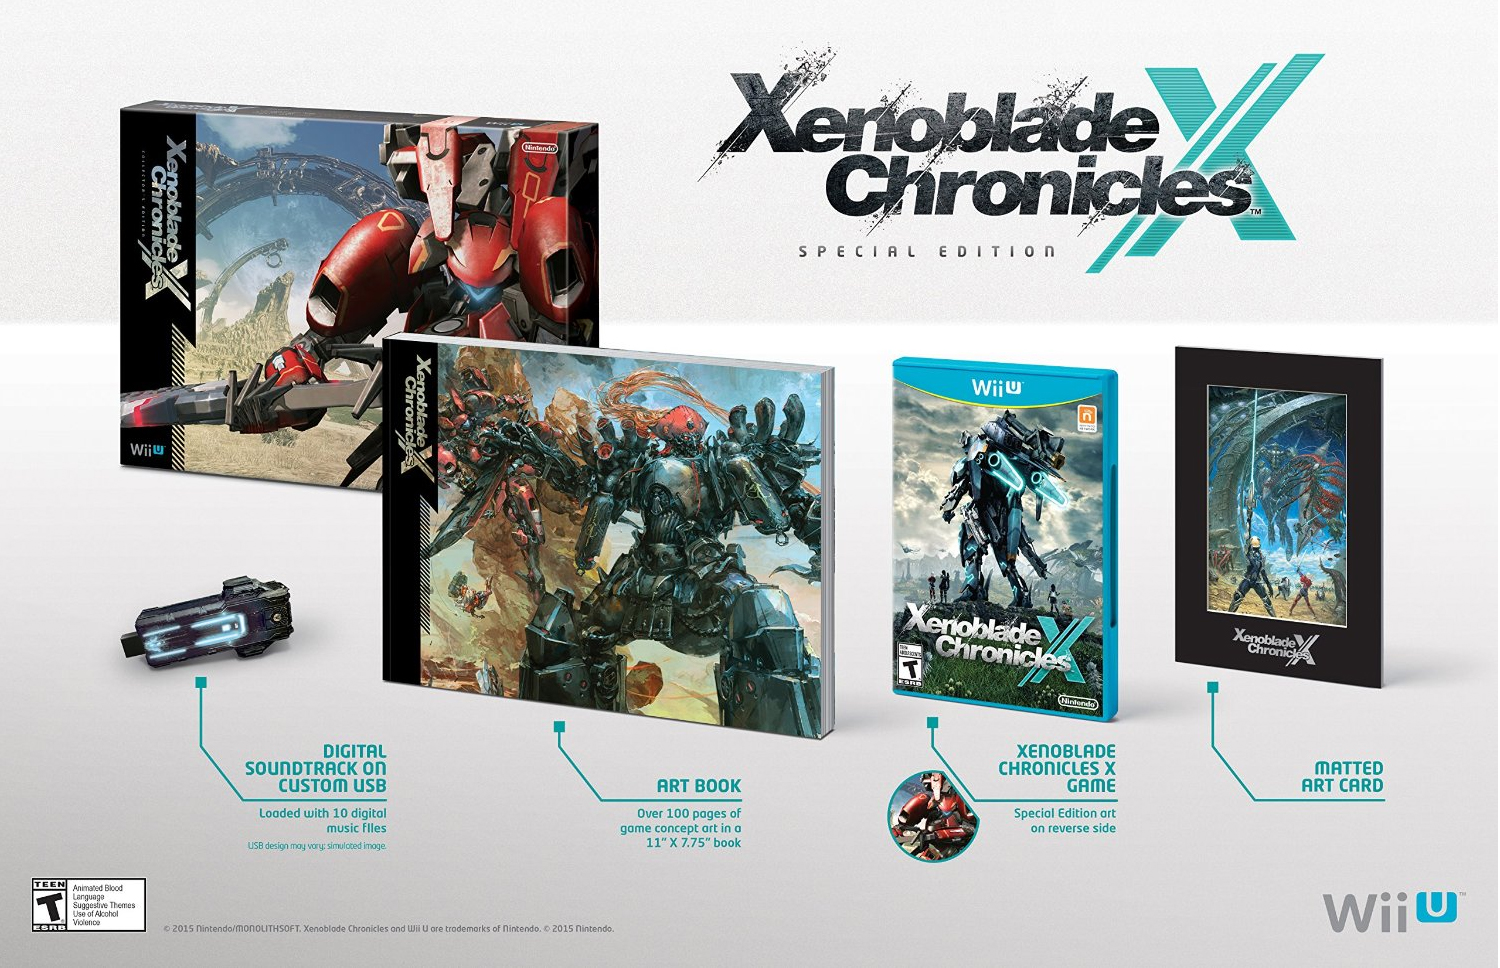 'Xenoblade Chronicles X Special Edition' Contents